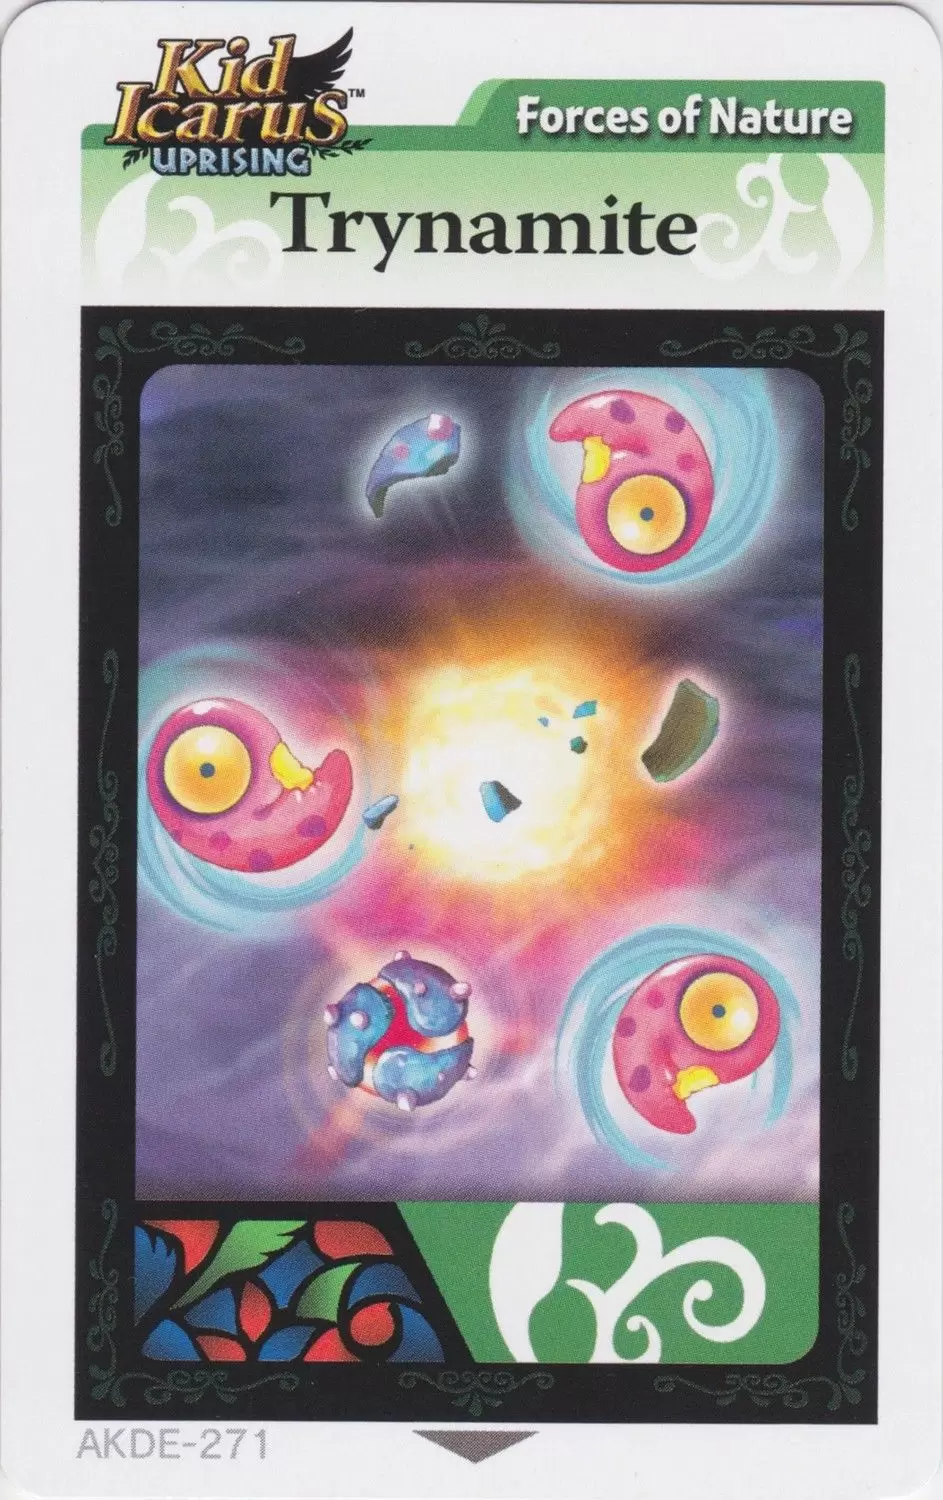 Kid Icarus Uprising AR cards - Trynamite